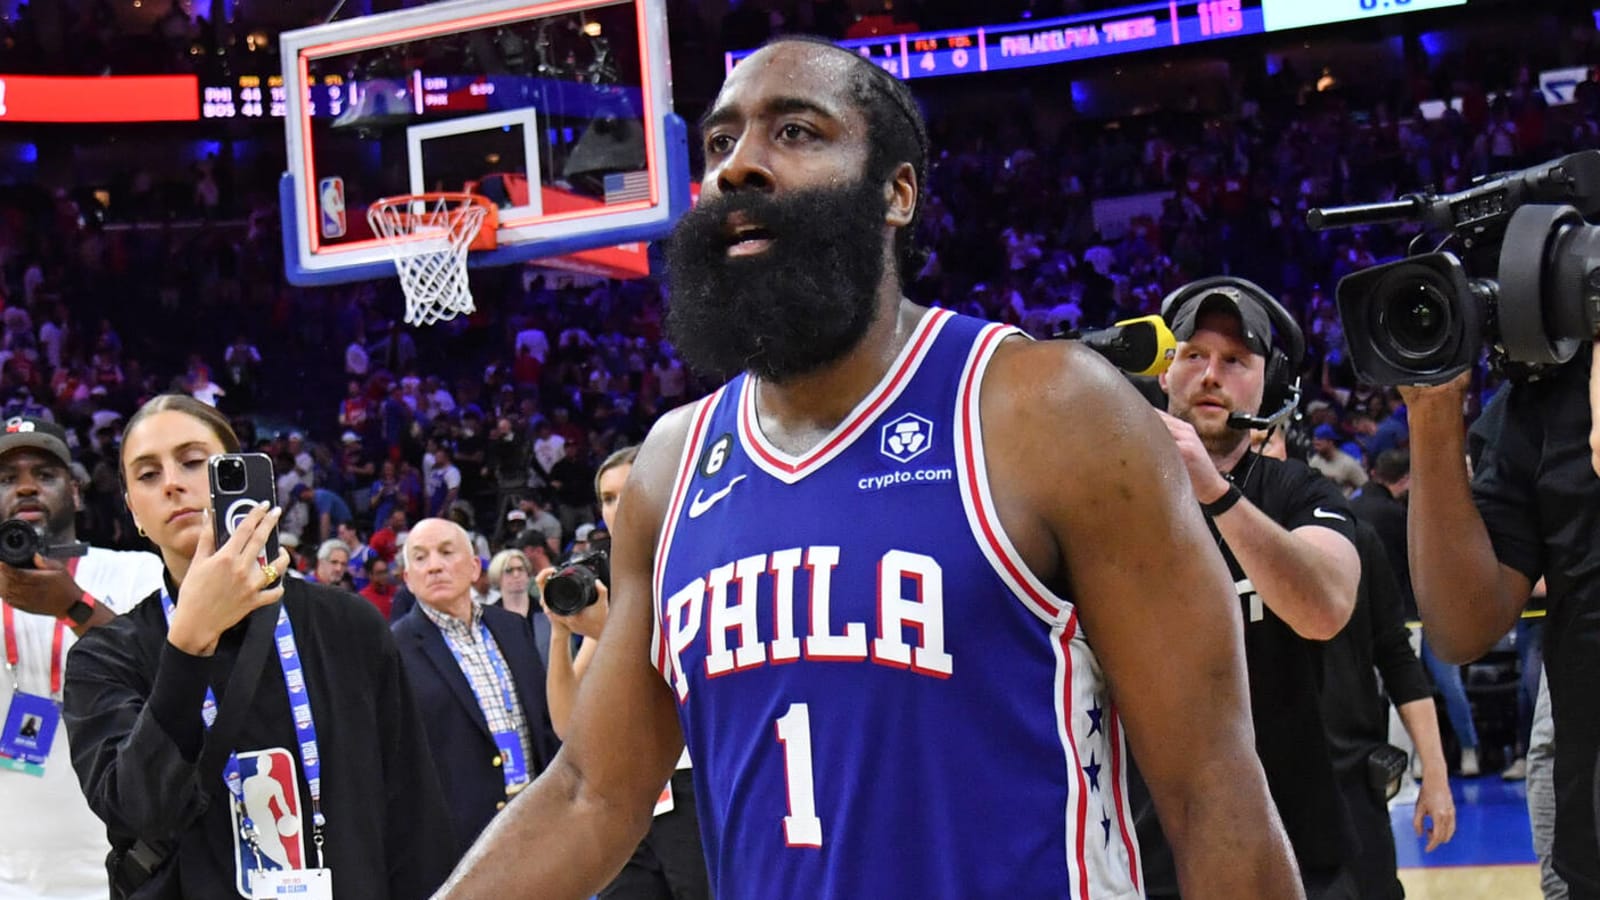 If the Clippers don't want Harden, who will trade for him?